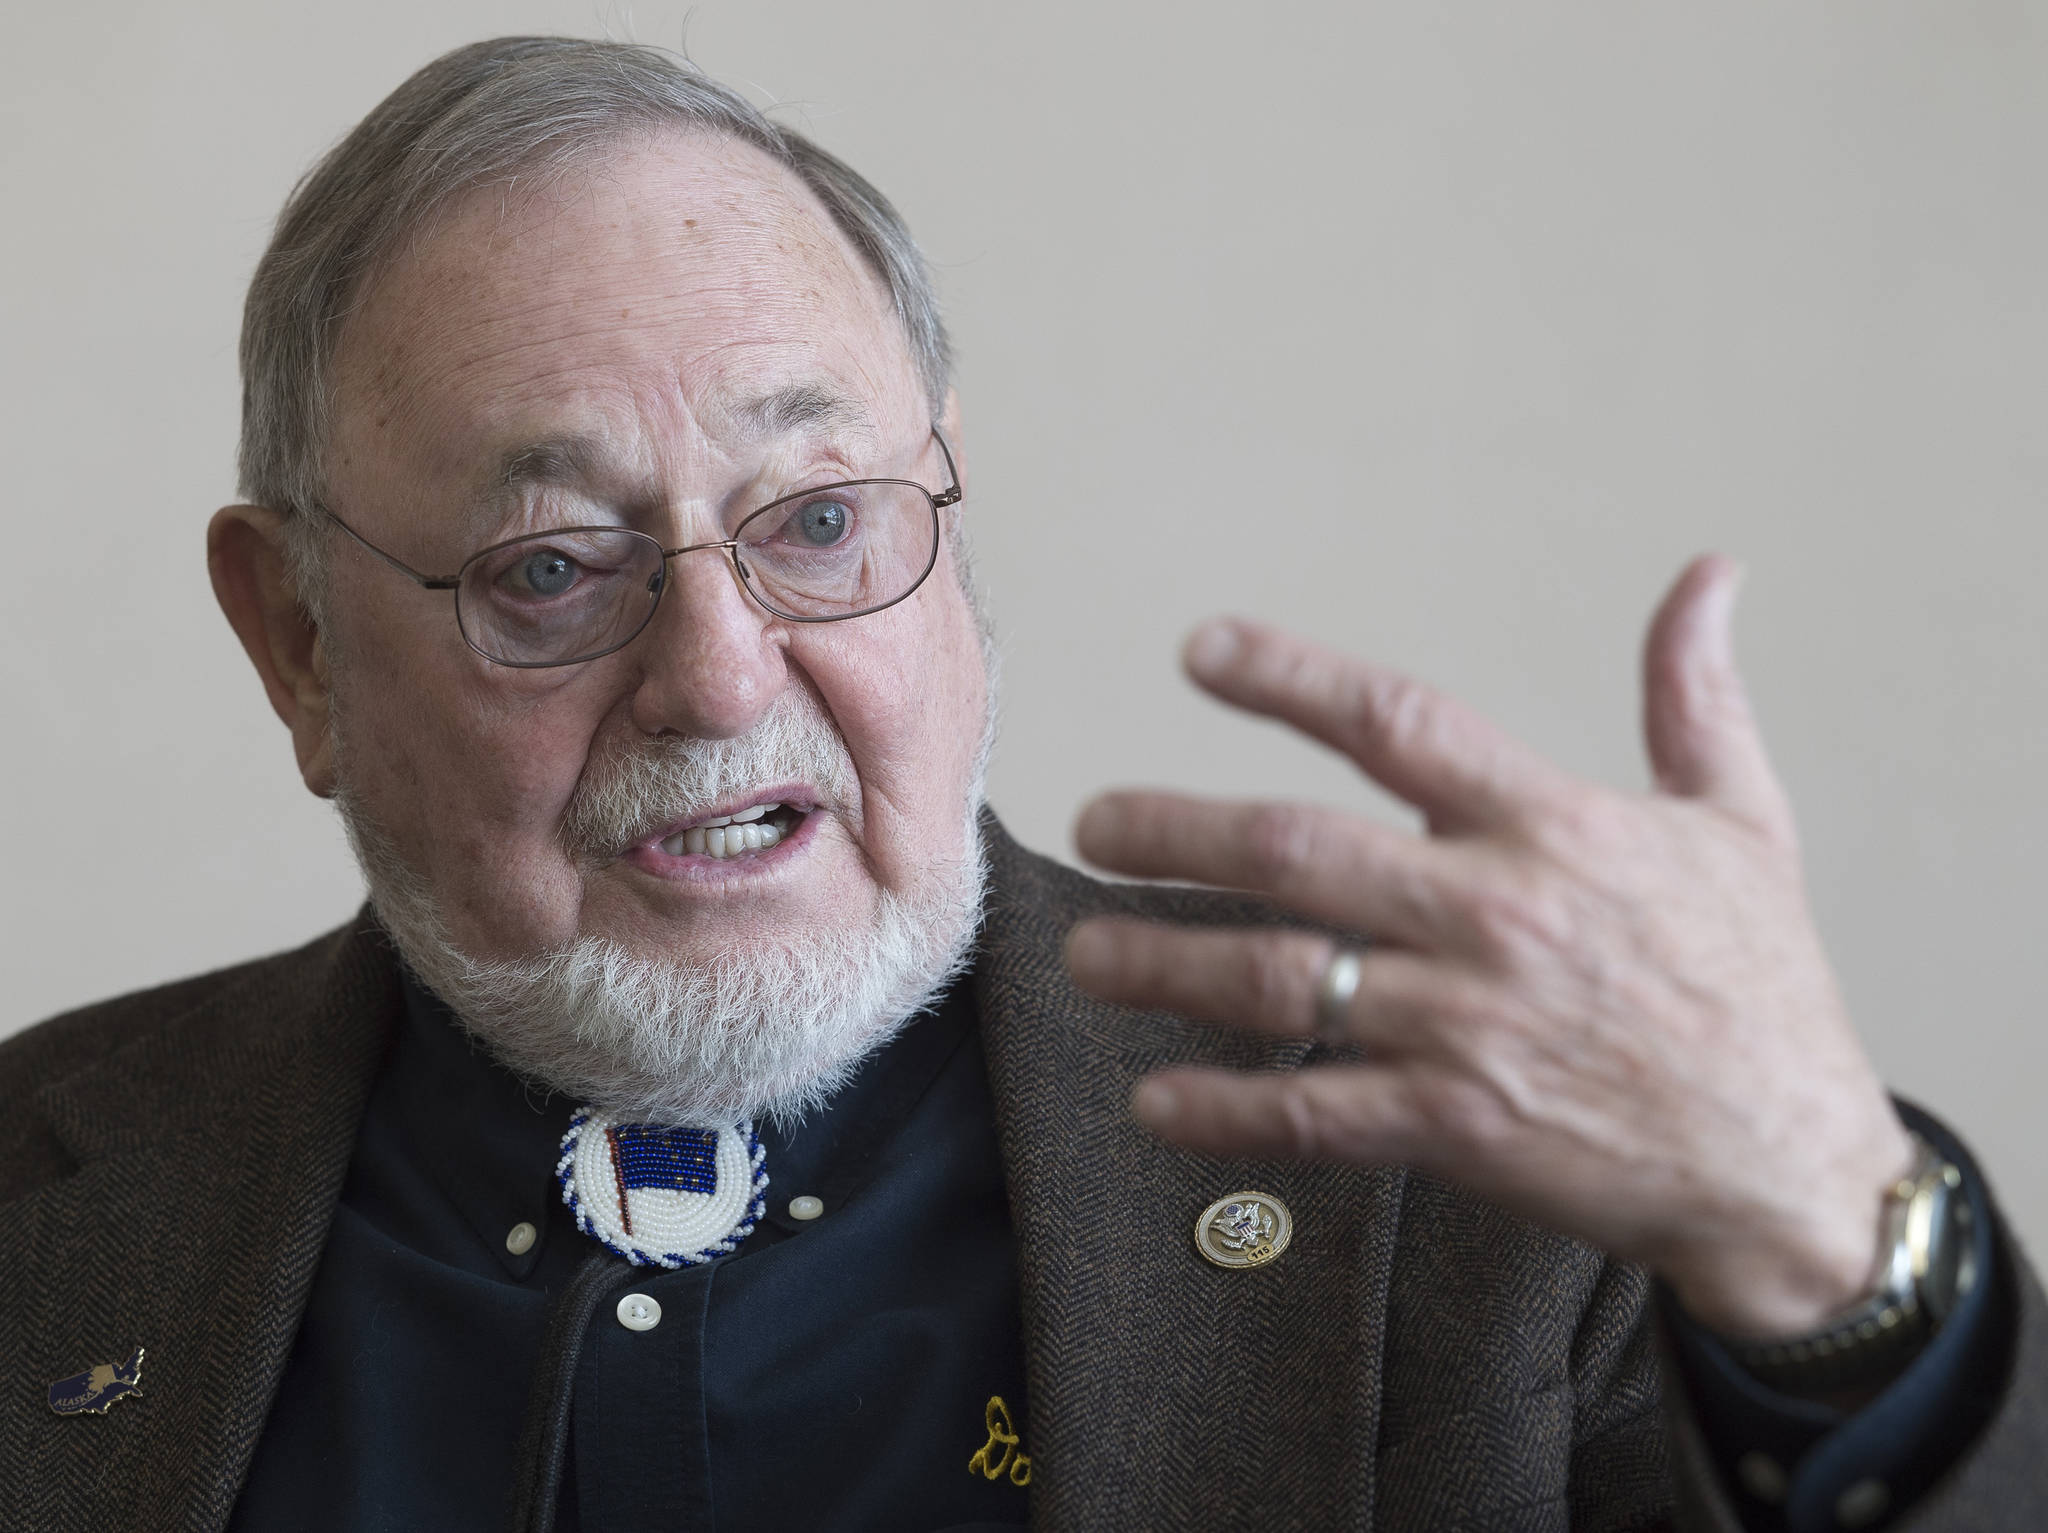 Alaska Rep. Don Young speaks during an interview at the Juneau Empire on Wednesday, Feb. 21, 2018.